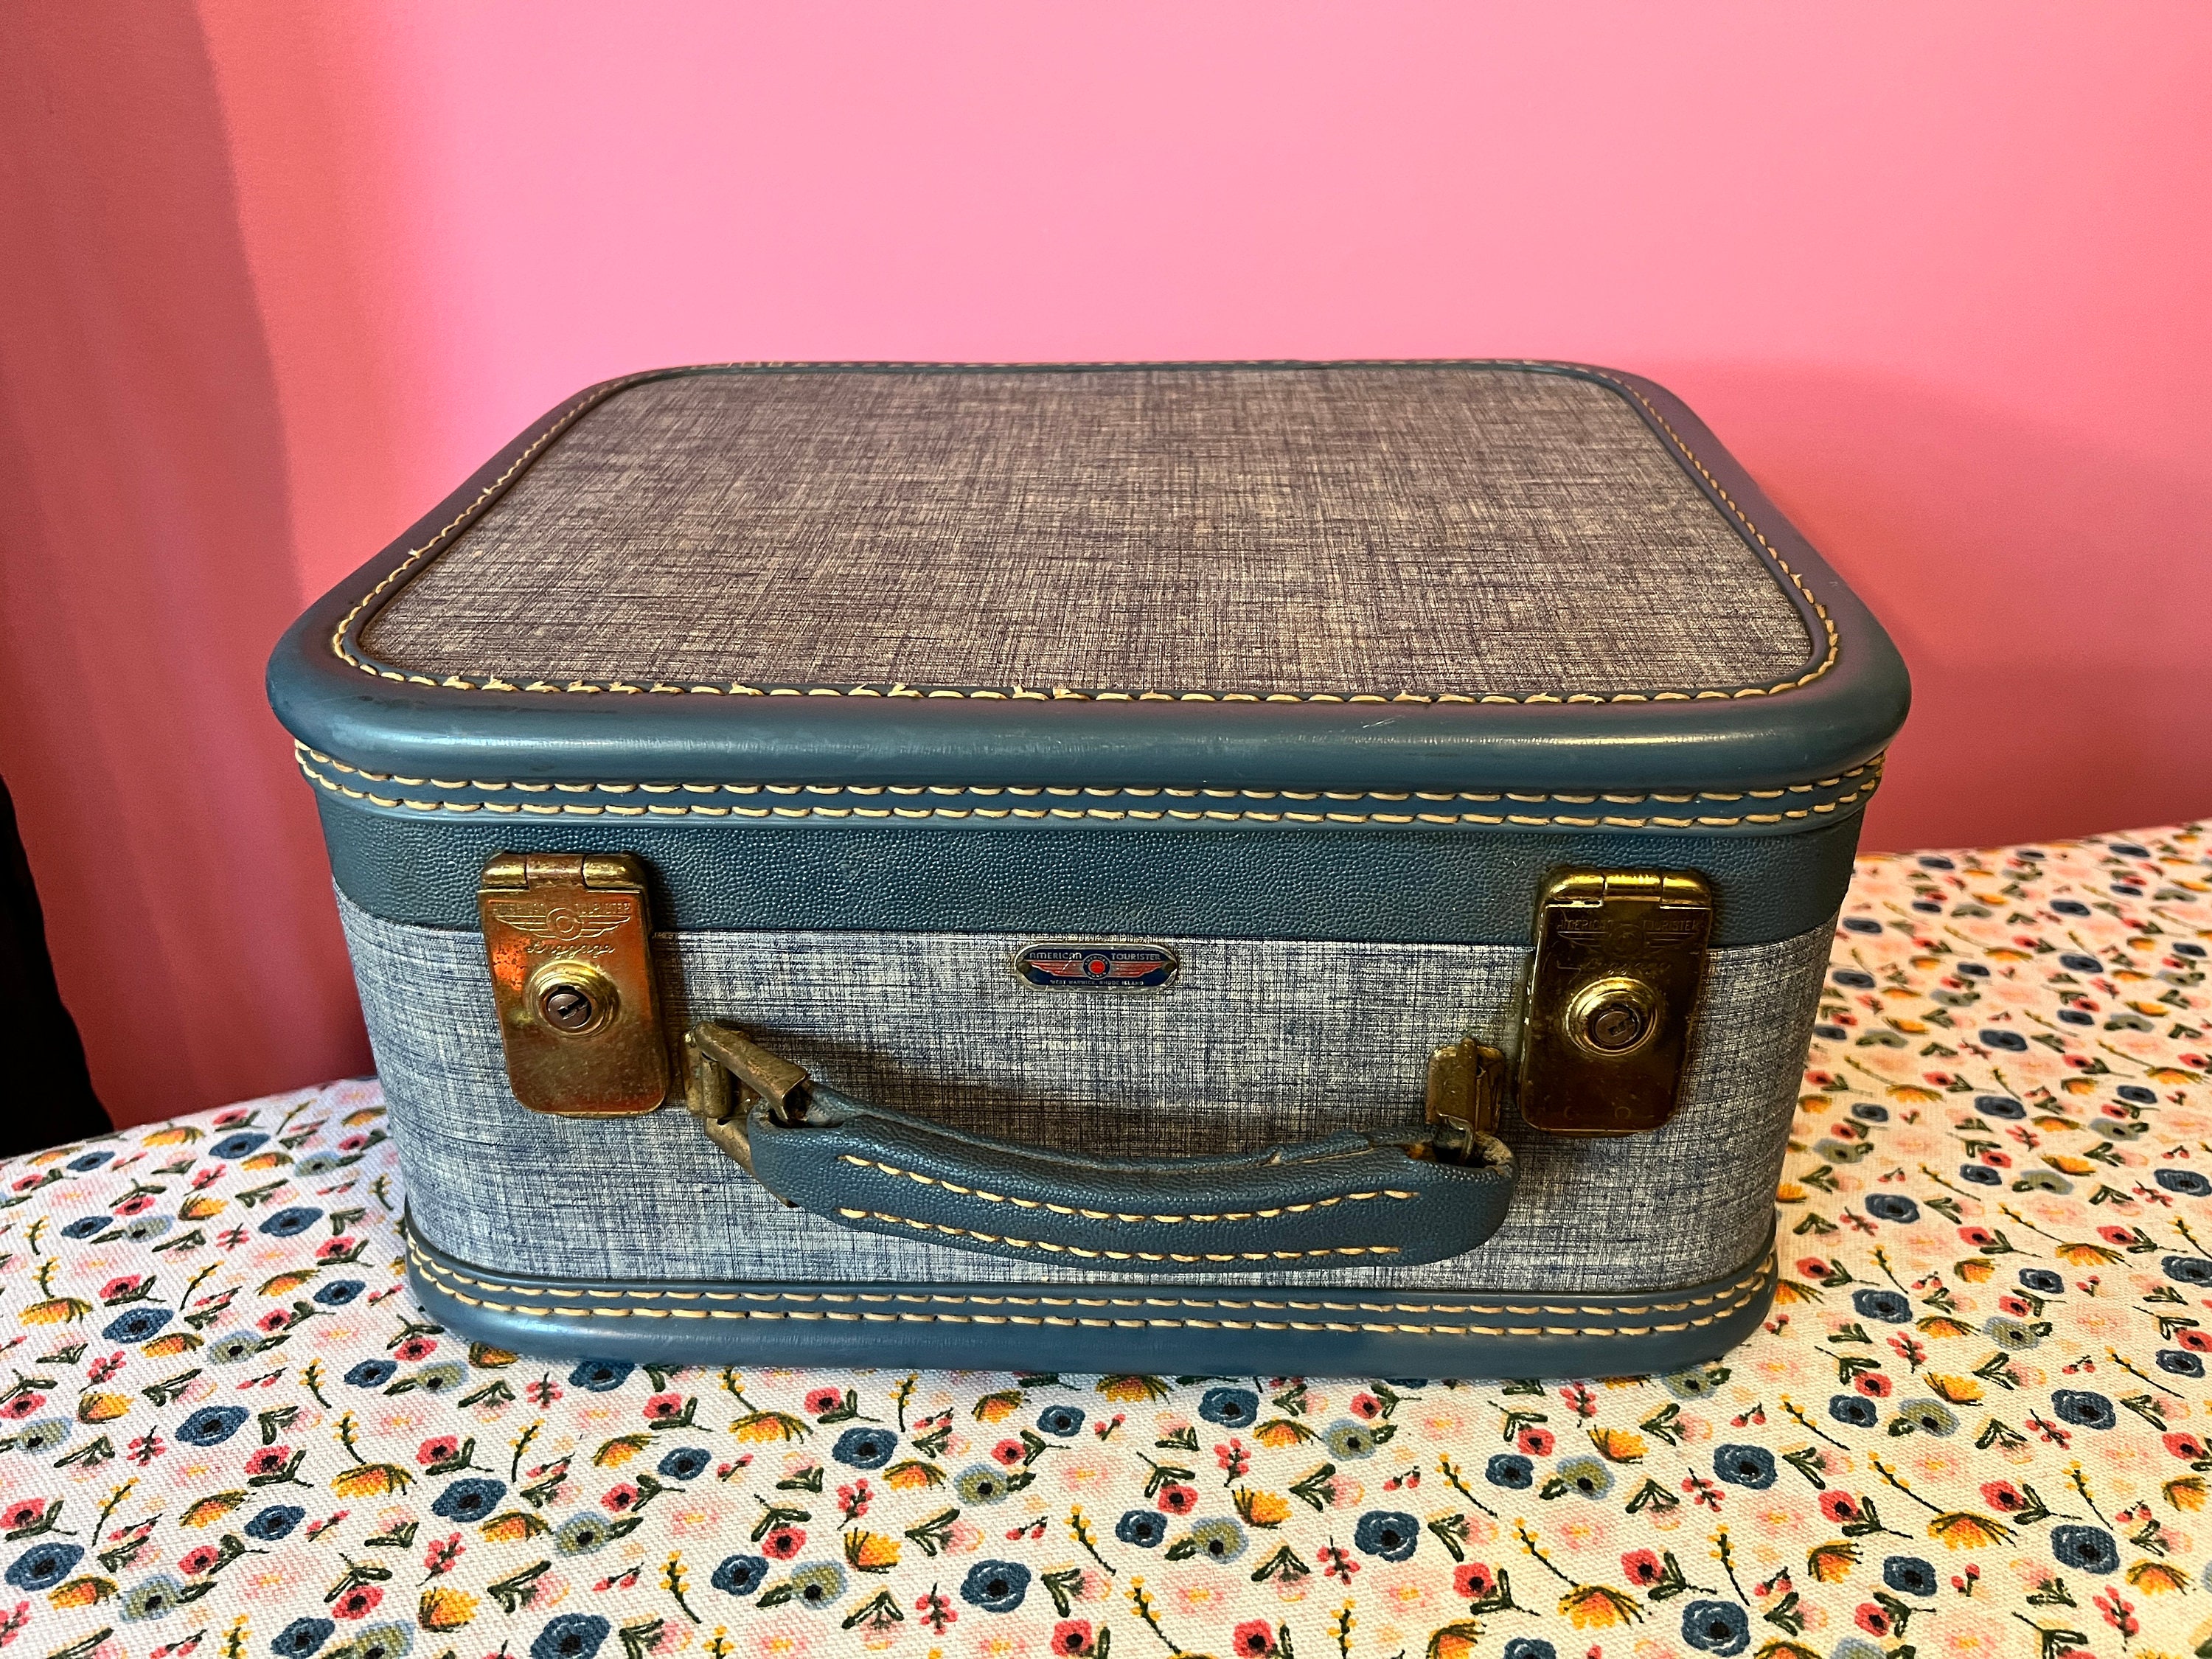 French Vintage Vanity Case 50's Train Luggage Cosmetic 